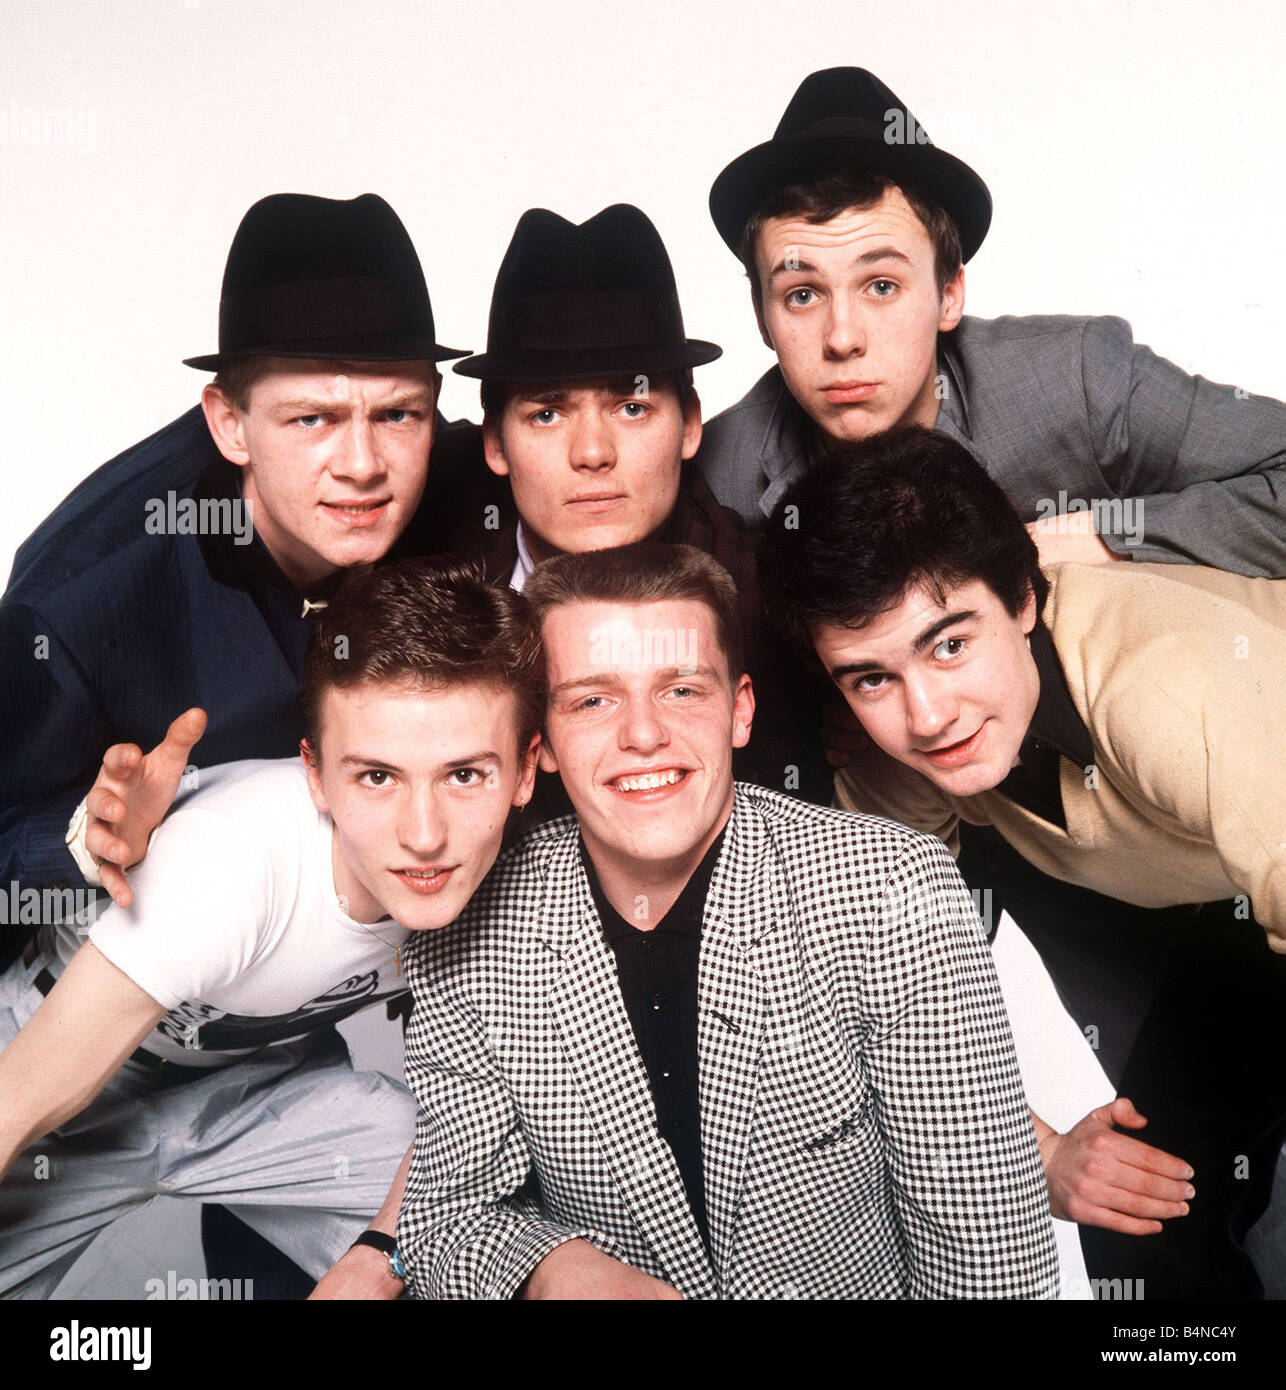 Madness Pop Group High Resolution Stock Photography and Images - Alamy